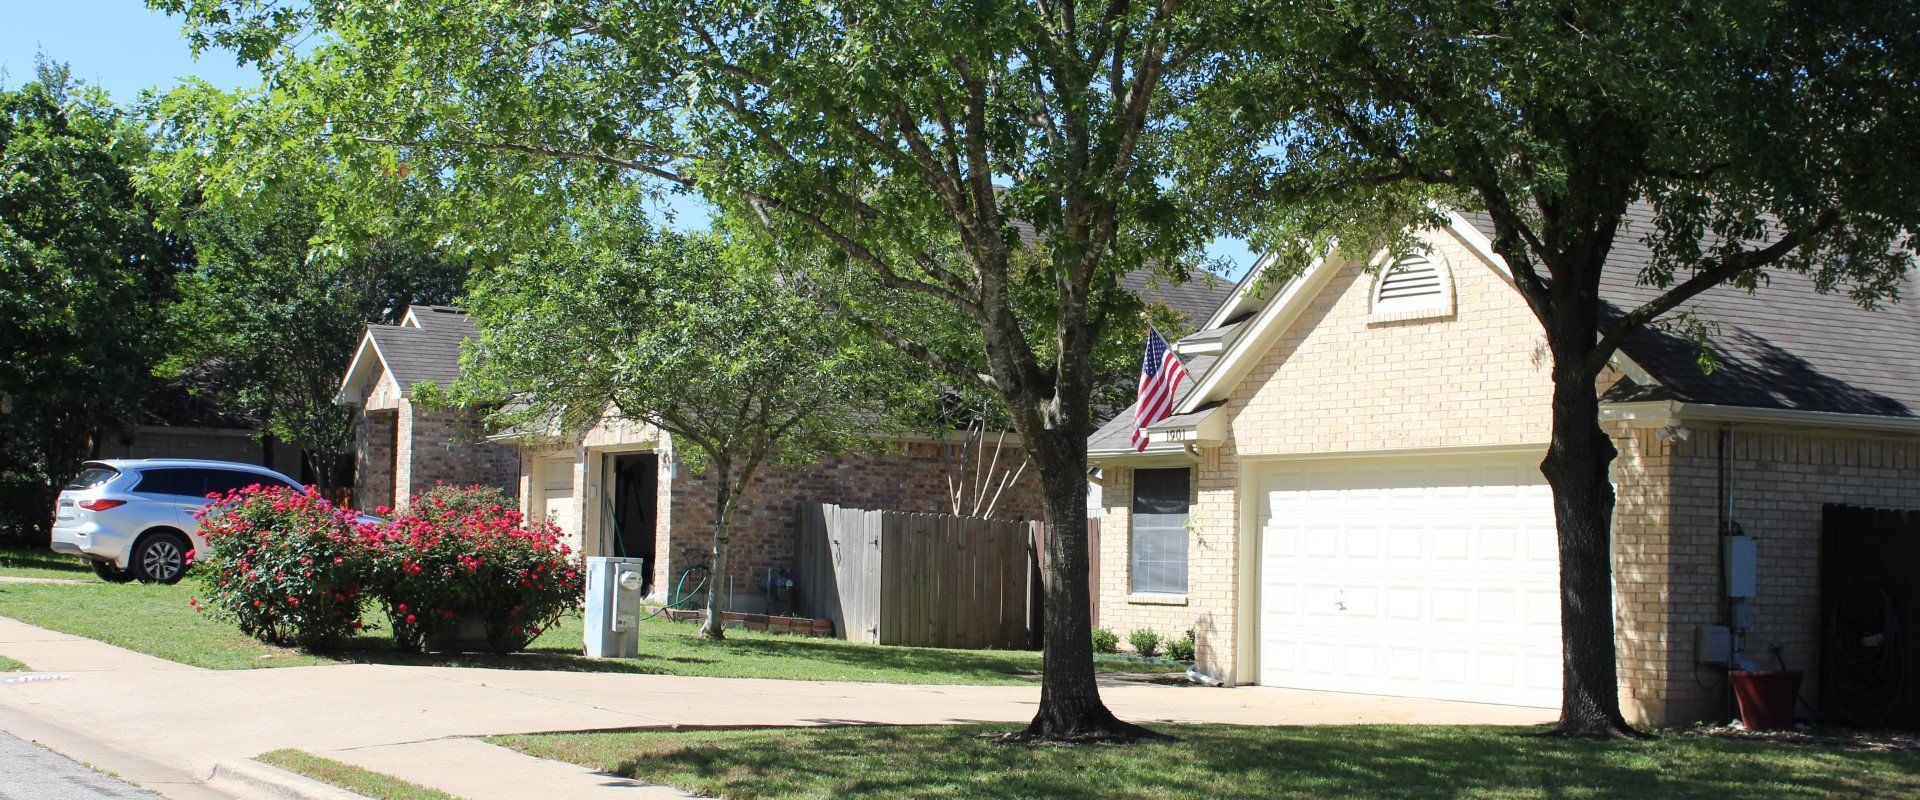 WE BUY HOUSES HUTTO TEXAS